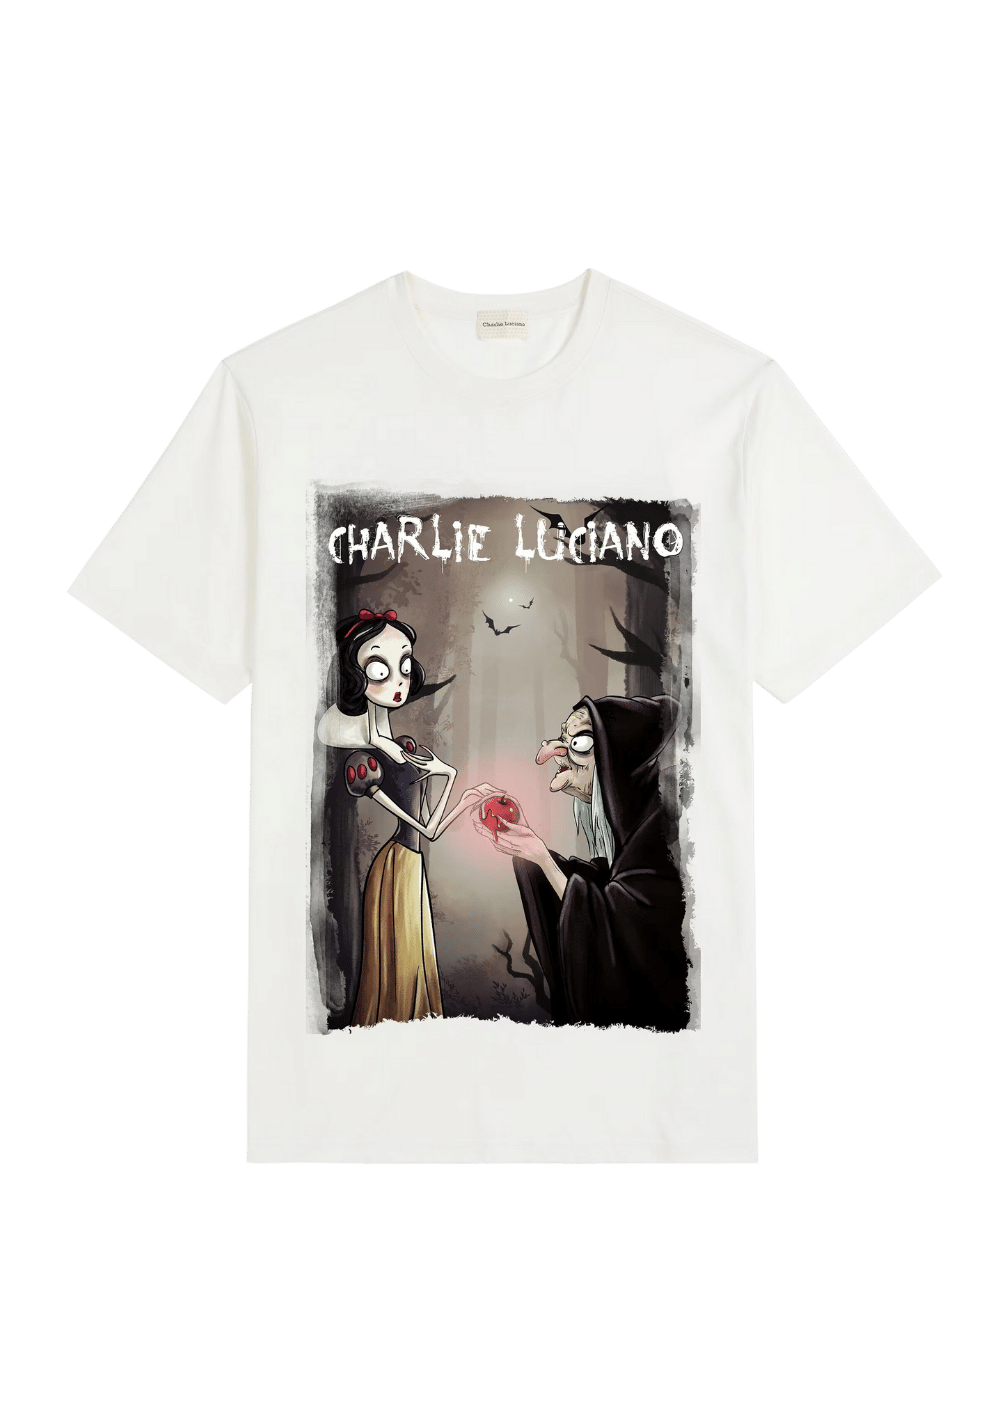 'Snow White And Witch' Print T-Shirt - PSYLOS 1, 'Snow White And Witch' Print T-Shirt, T-Shirt, Charlie Luciano, PSYLOS 1